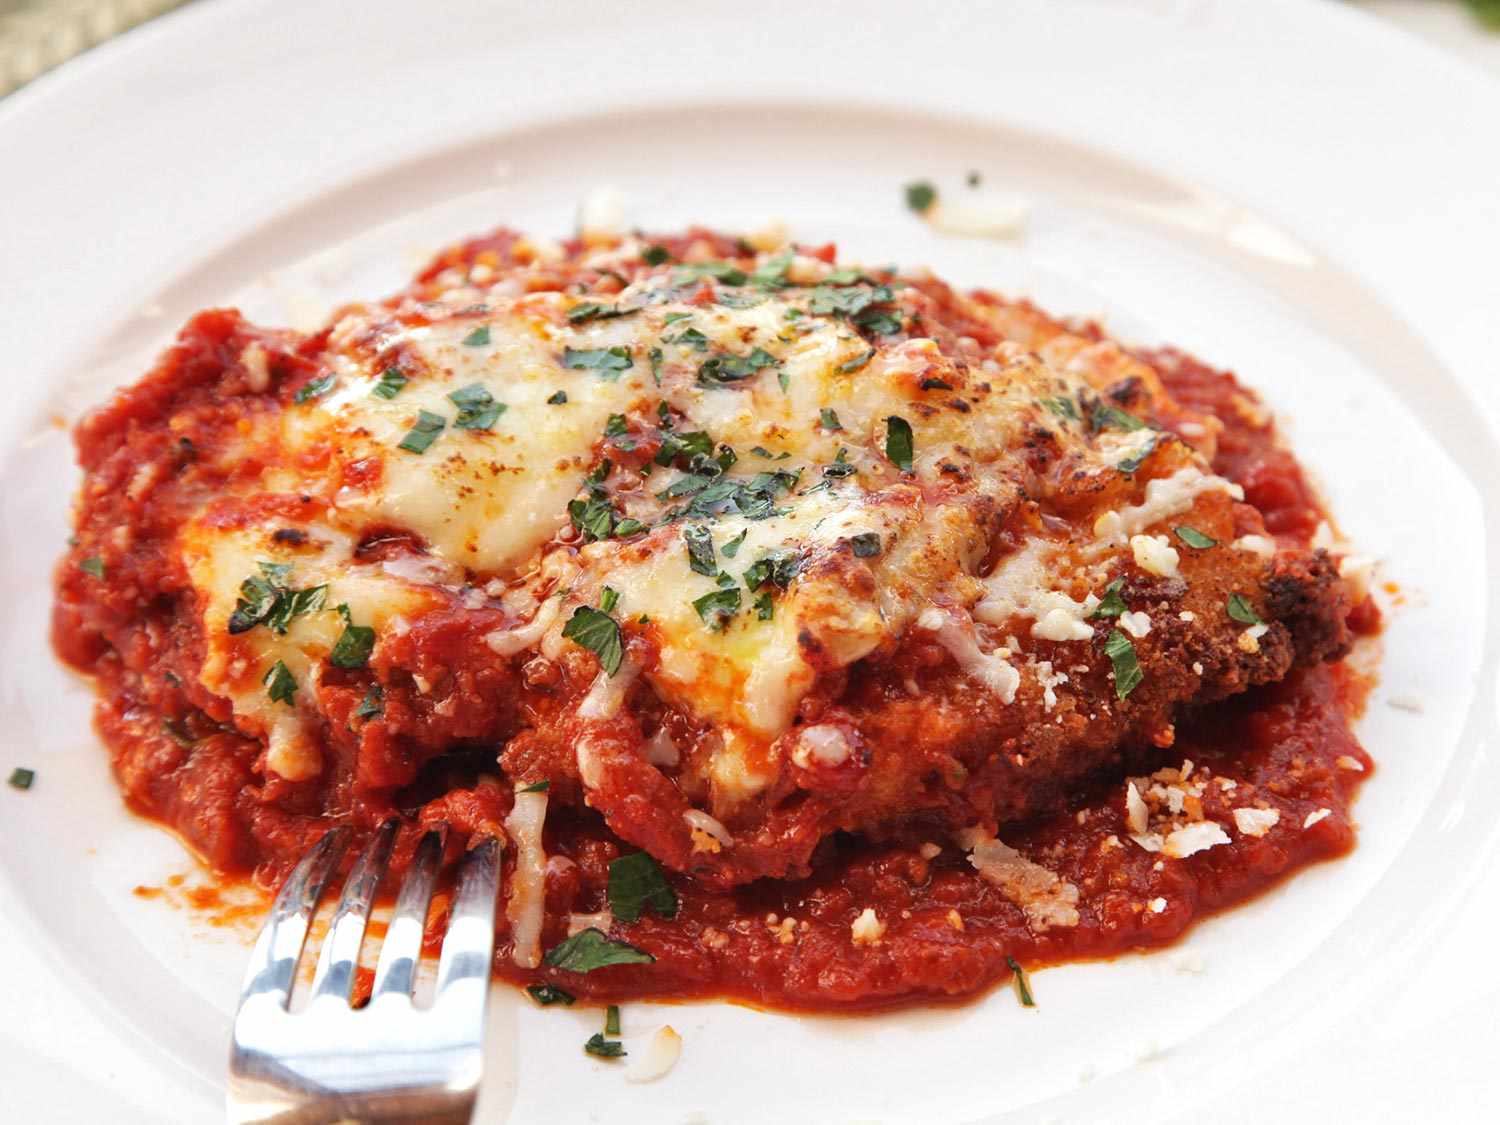 Taking a fork to a plate of chicken parmesan